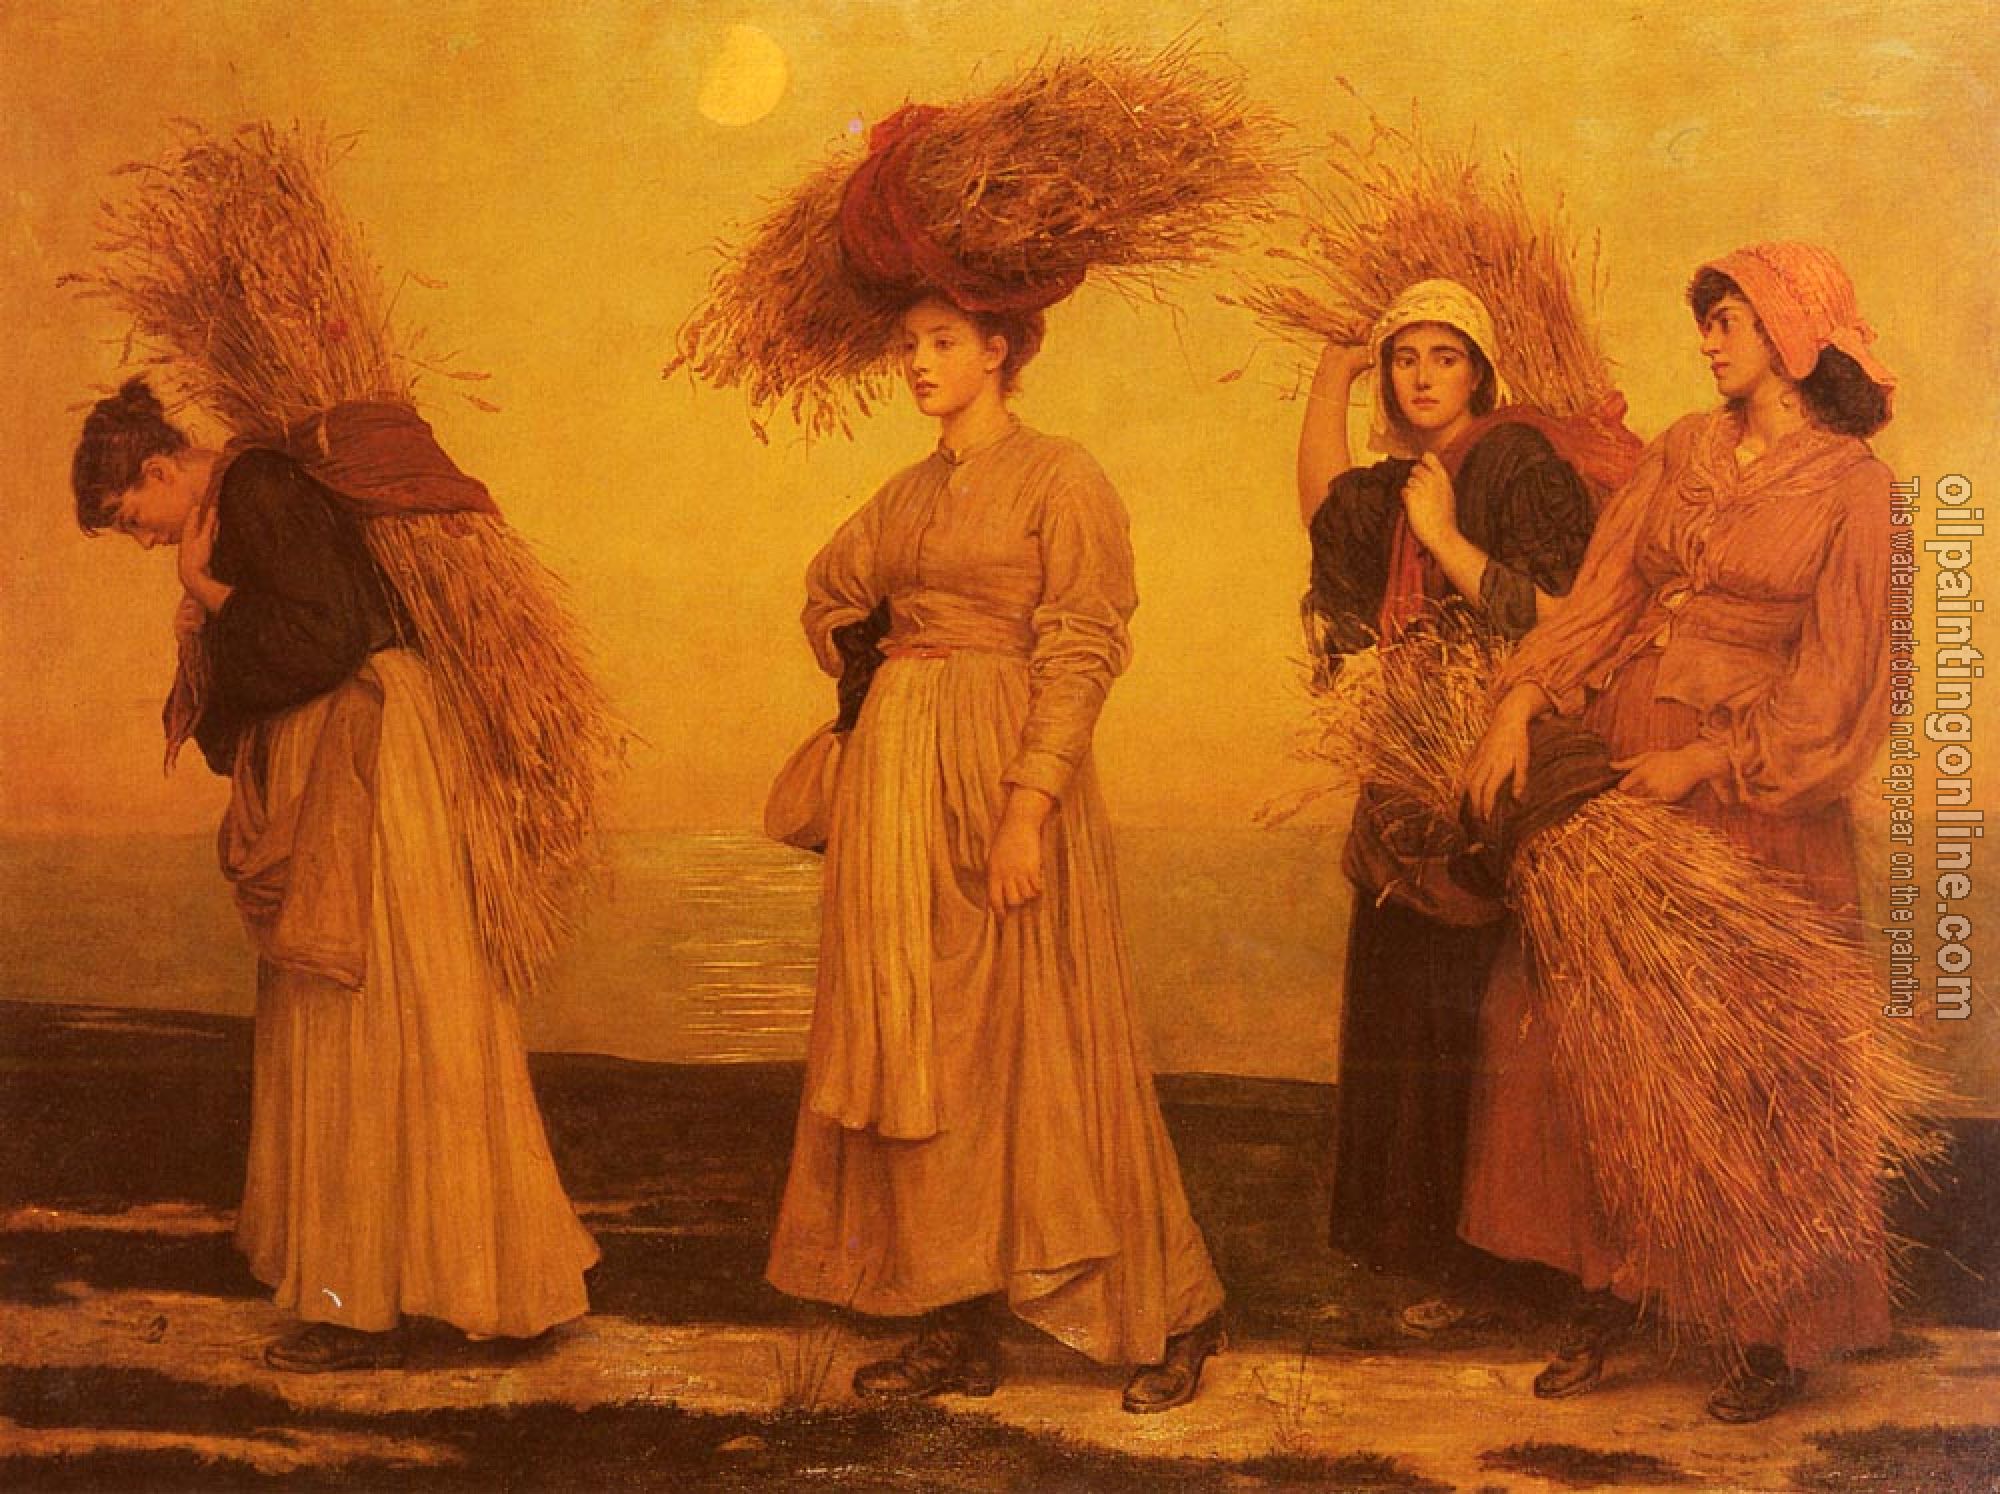 Prinsep, Valentine Cameron - Home From Gleaning